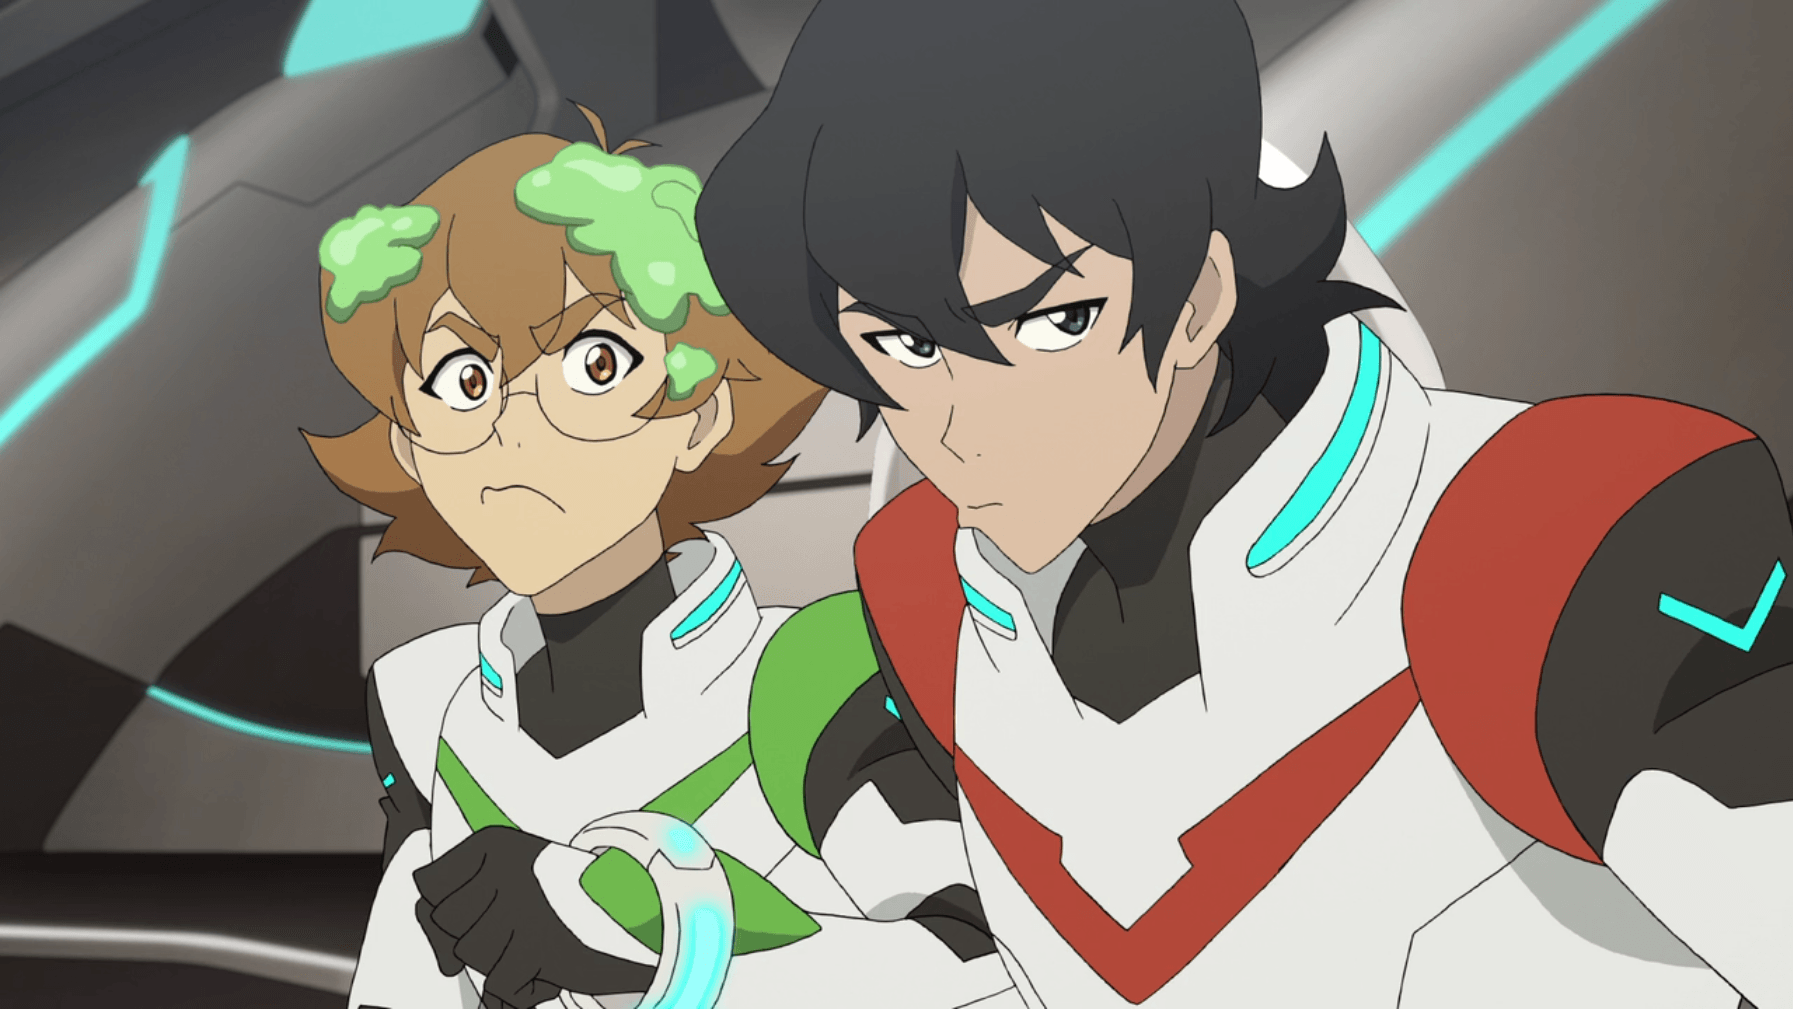 Pidge and Keith gives Princess Allura the stink eye after Allura